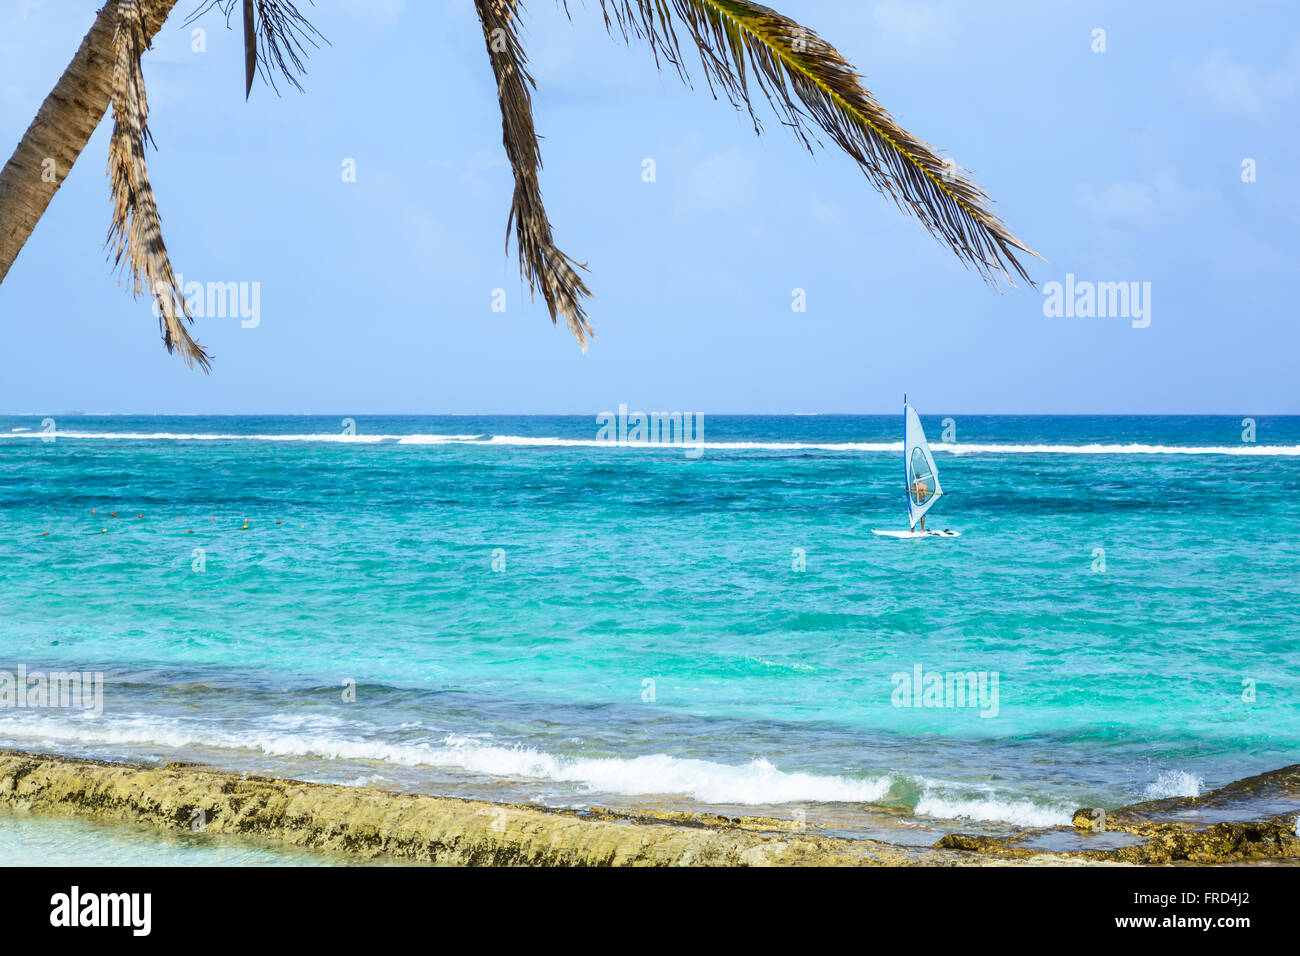 Palm tree in a sunny day at the beach in the island of San Andrés, Colombia, Stock Photo